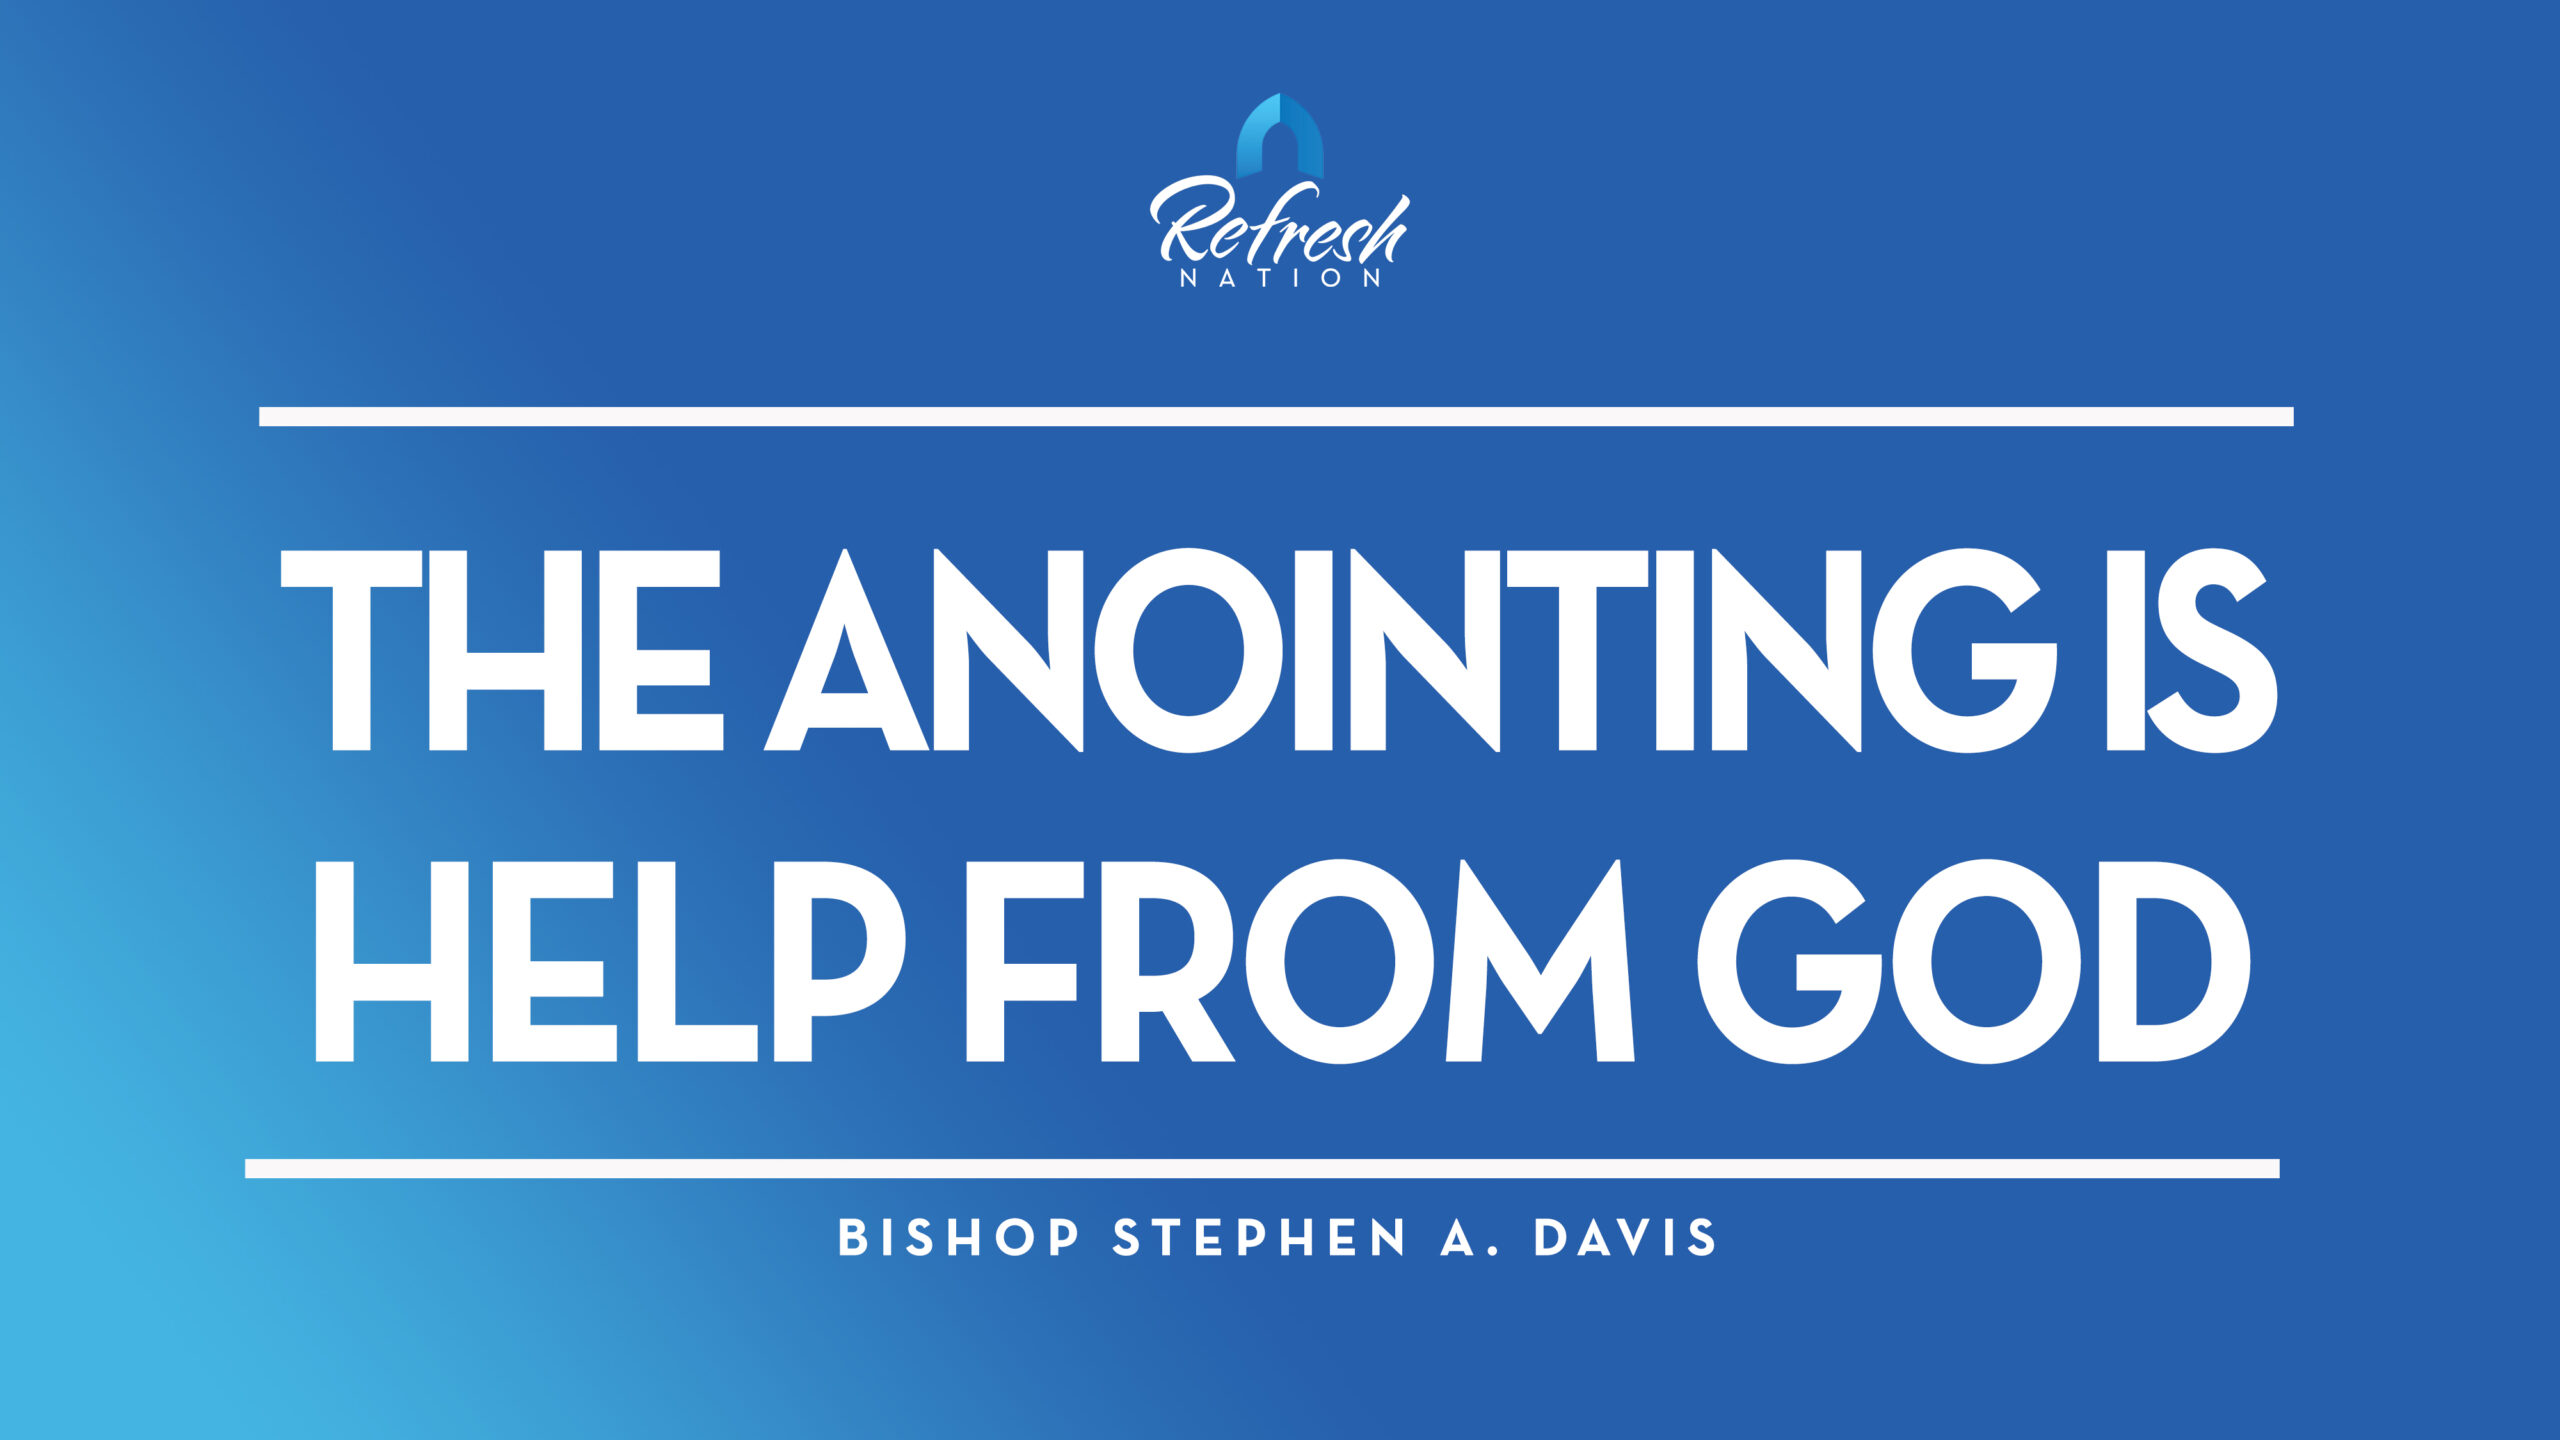 The Anointing Is Help From God – Bishop Stephen A. Davis